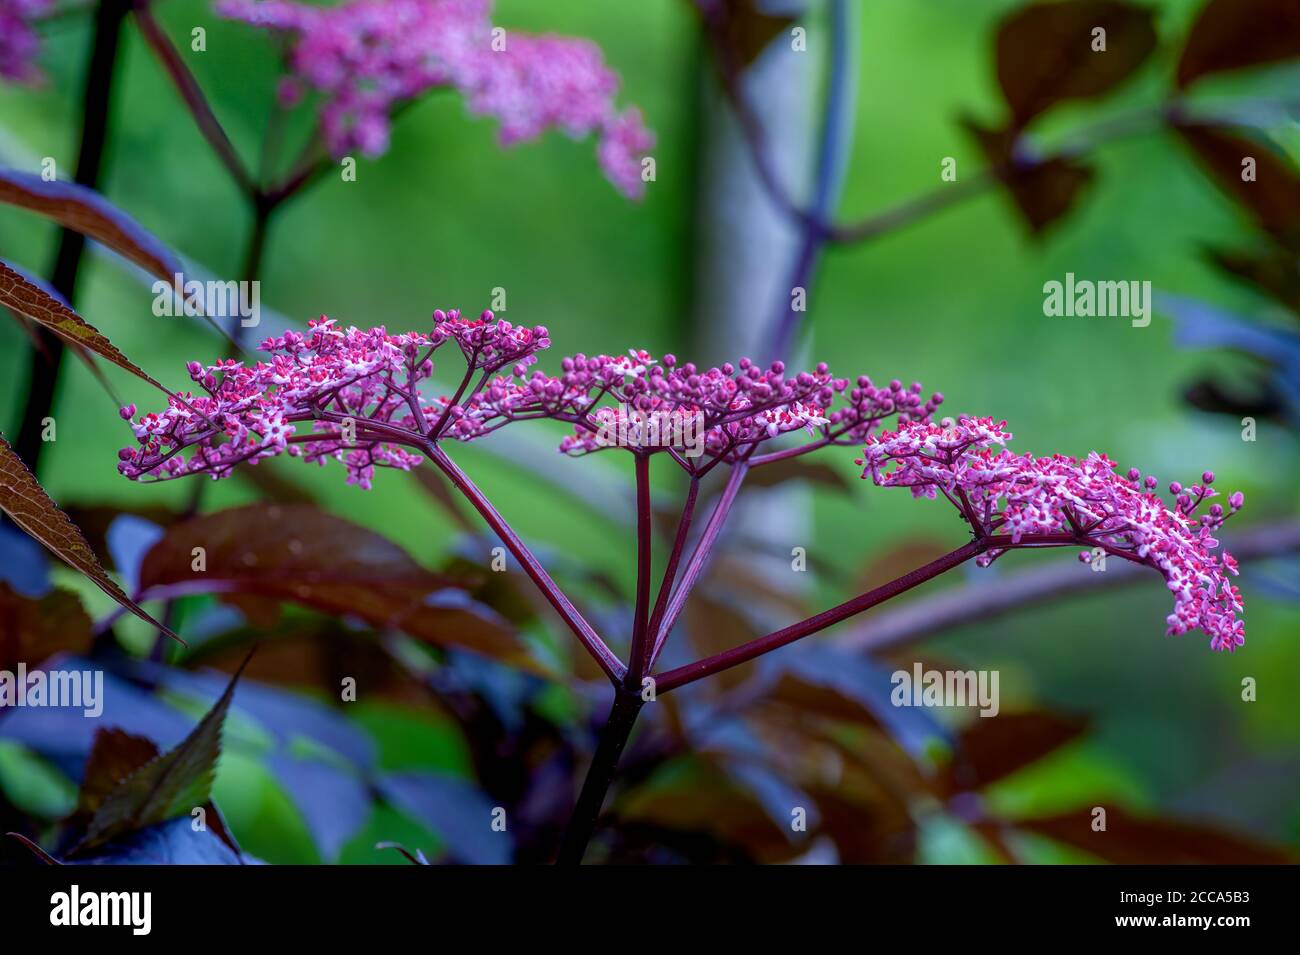 Spring blooming Black Lace Elderberry shrub with lacy like delicate blooms Stock Photo